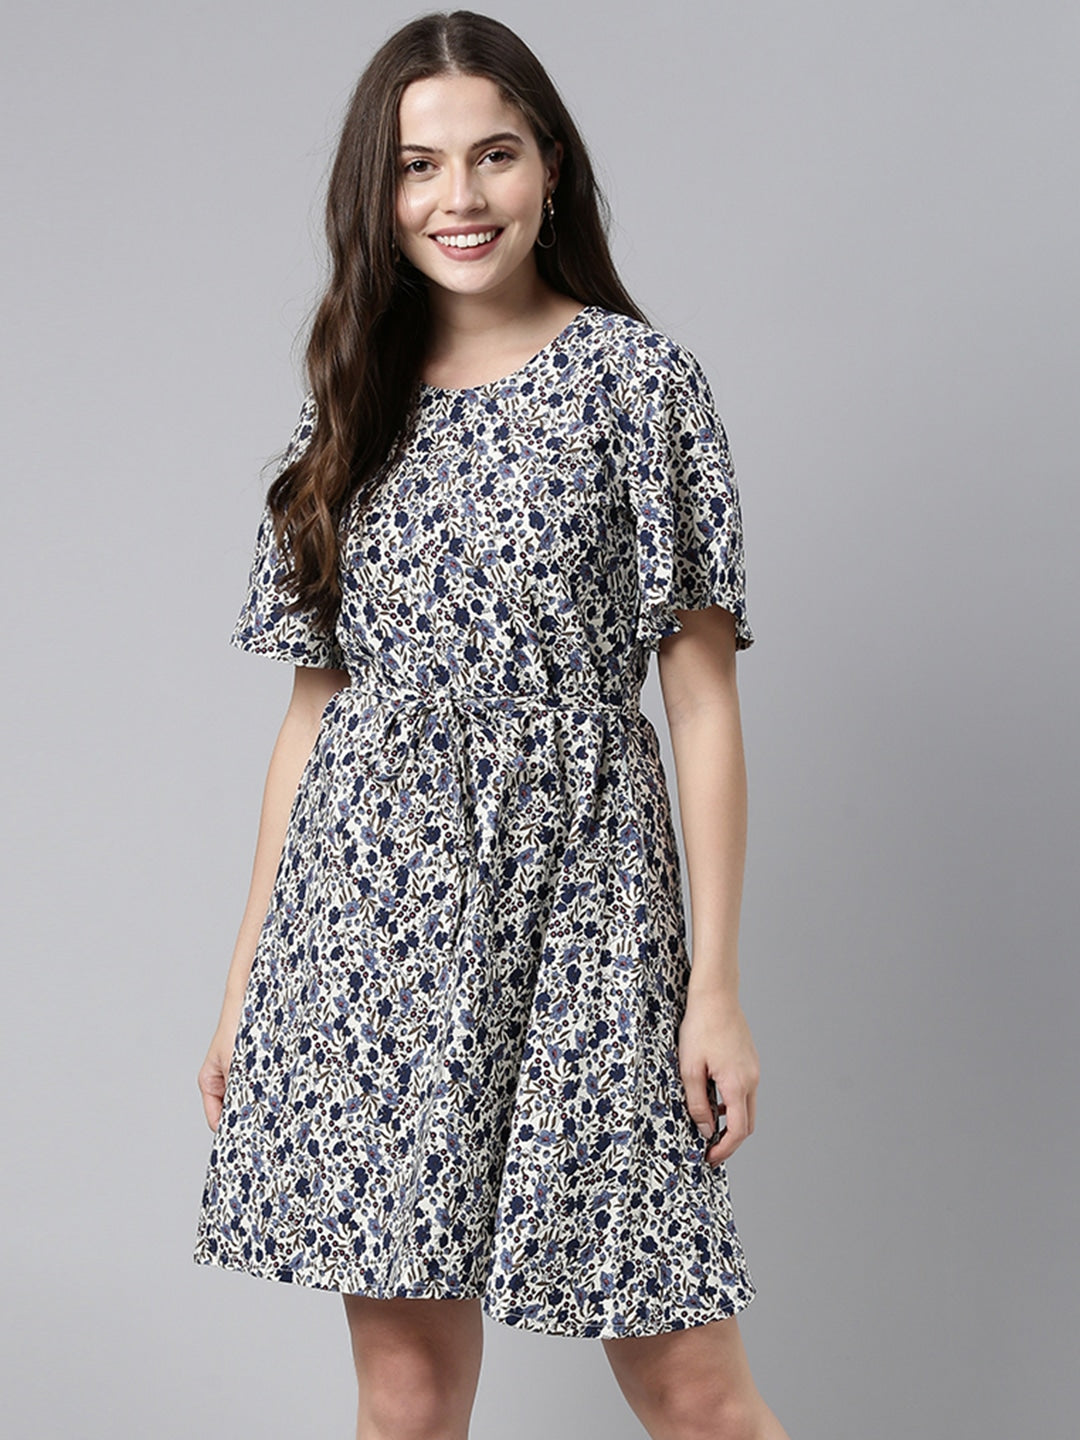 Women's White Polyester Floral Printed Dress  - Ahika